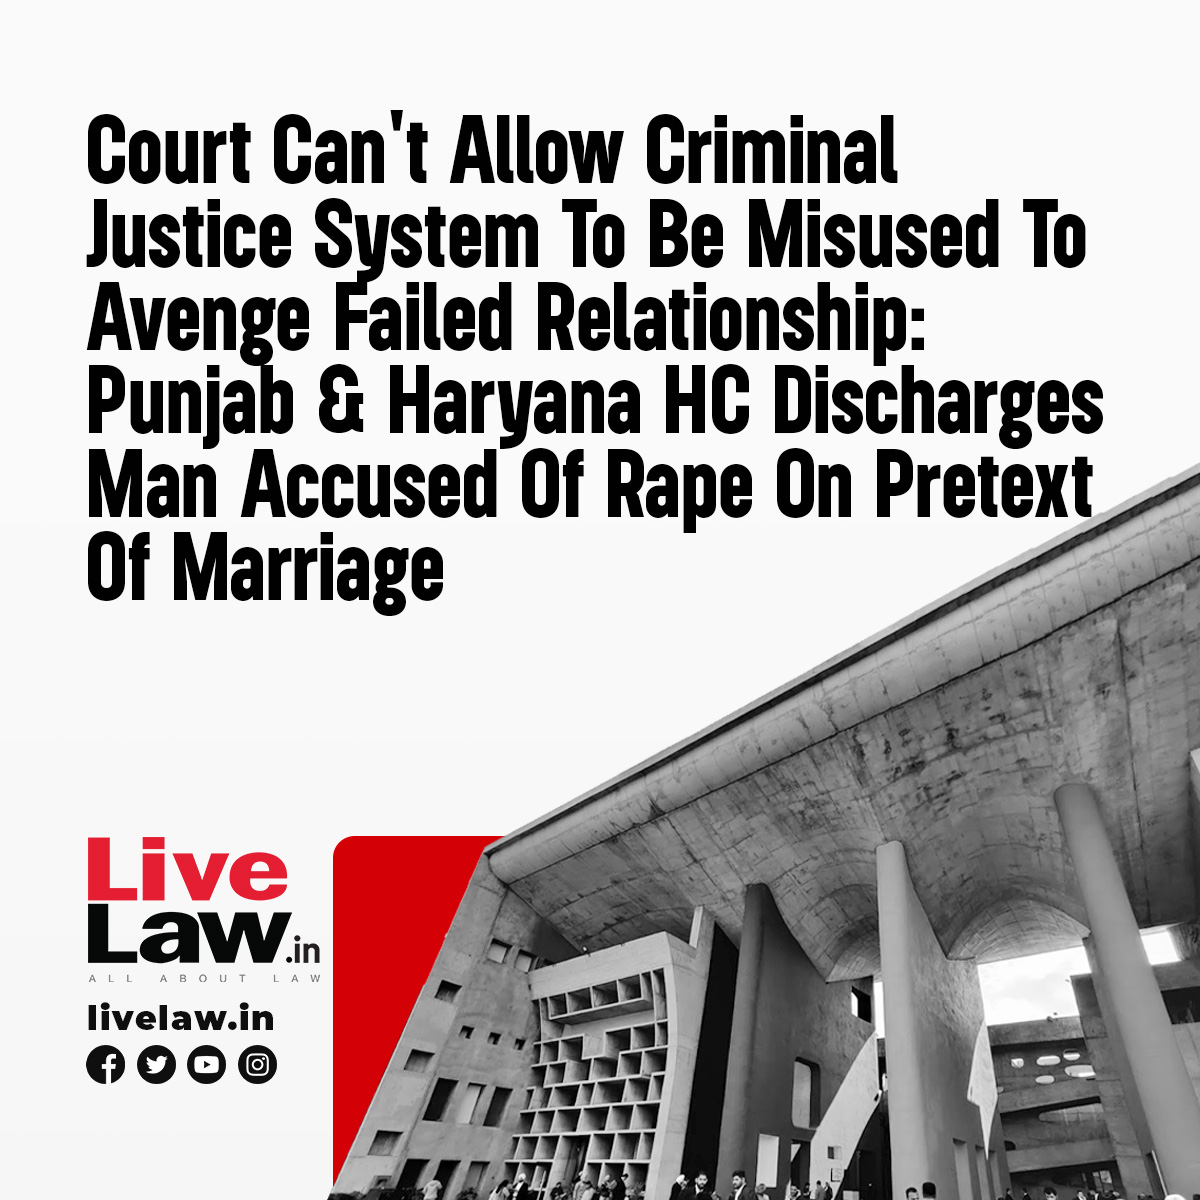 The Punjab & Haryana High Court has upheld the discharge of a man accused of committing rape on his partner under the pretext of marriage, observing that the woman consensually cohabited. Read more: t.ly/mdiSu